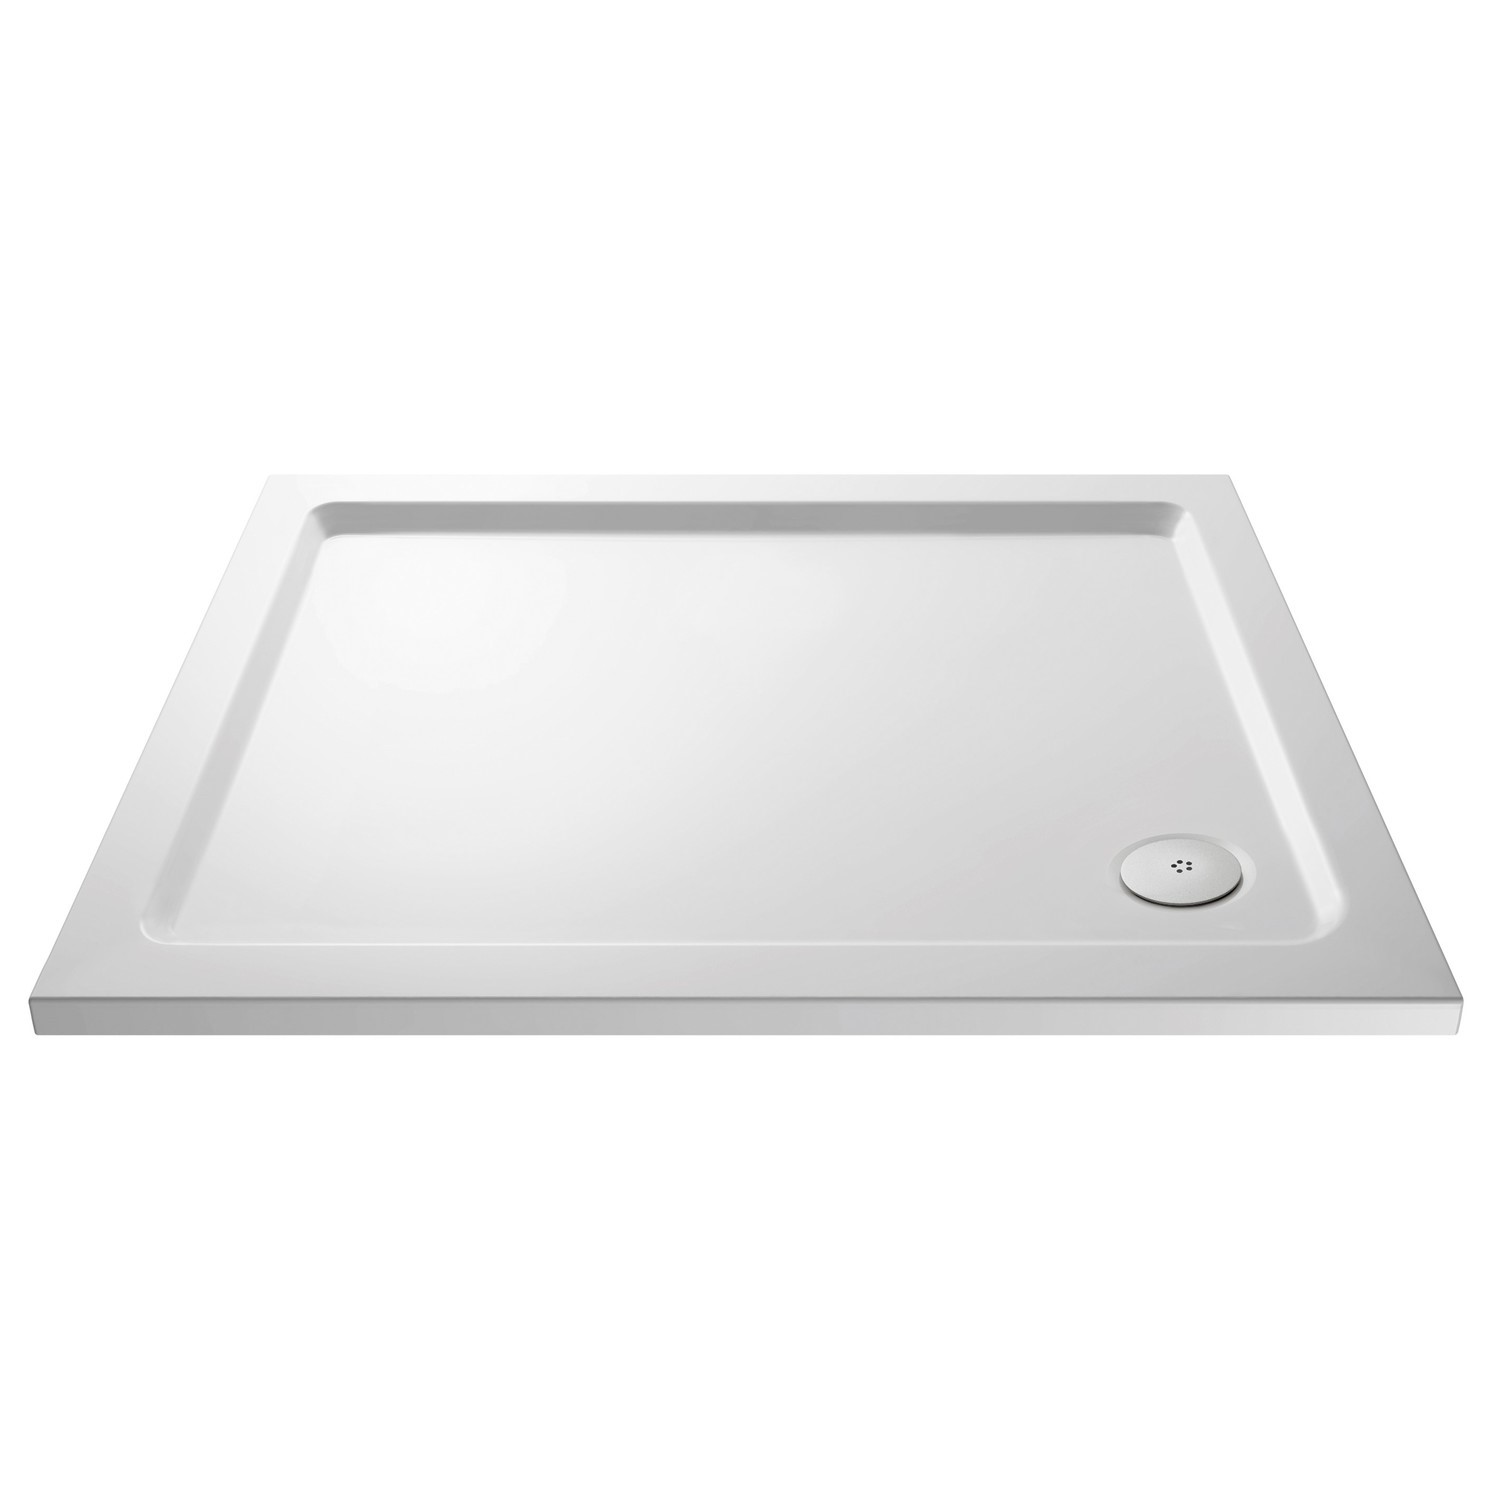 Low Profile Rectangular Shower Tray 1200 x 700mm - Purity